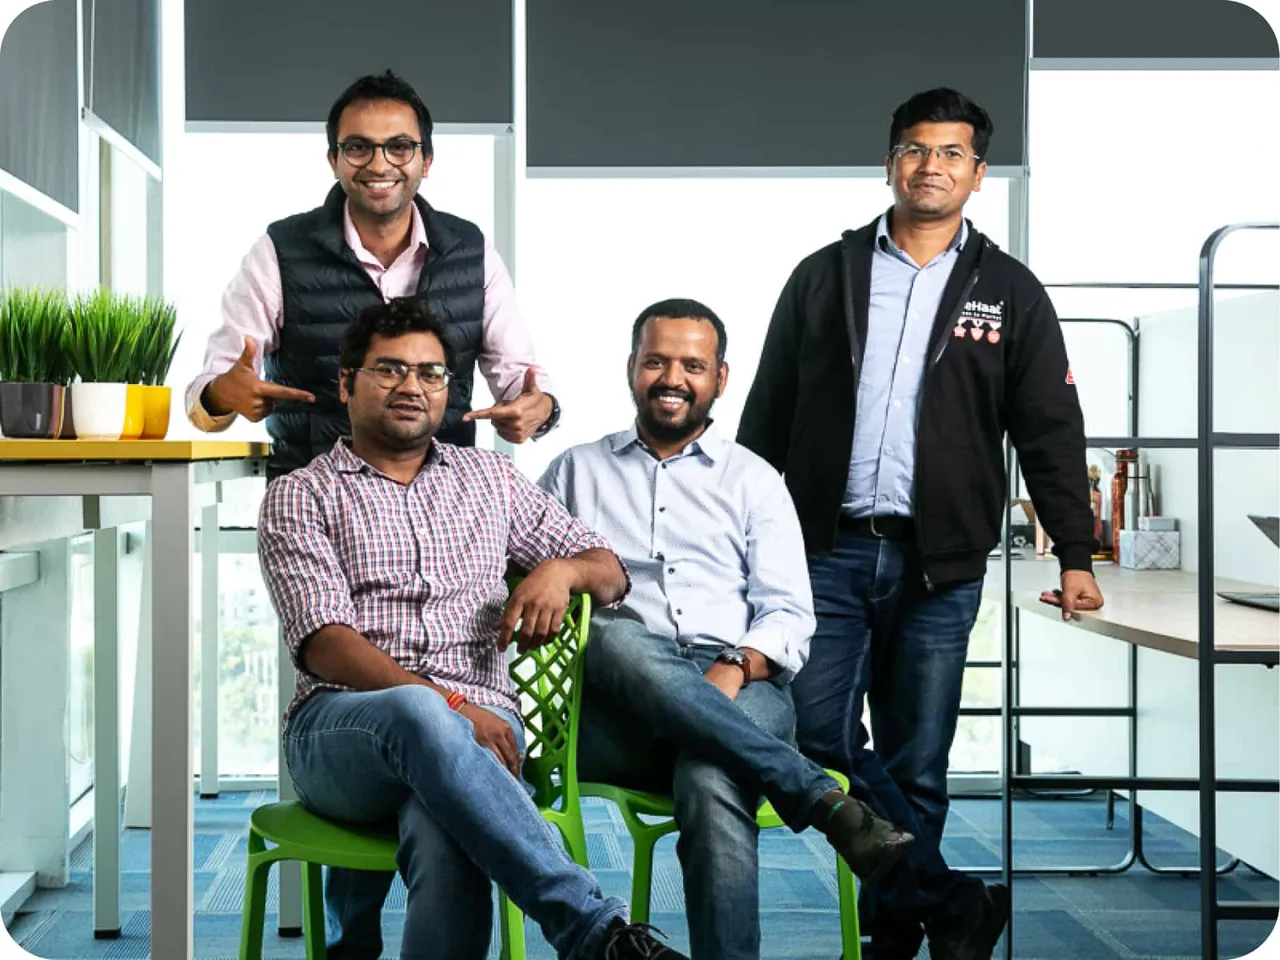 Agritech startup DeHaat raises $60M in a Series E round led by Sofina, Temasek